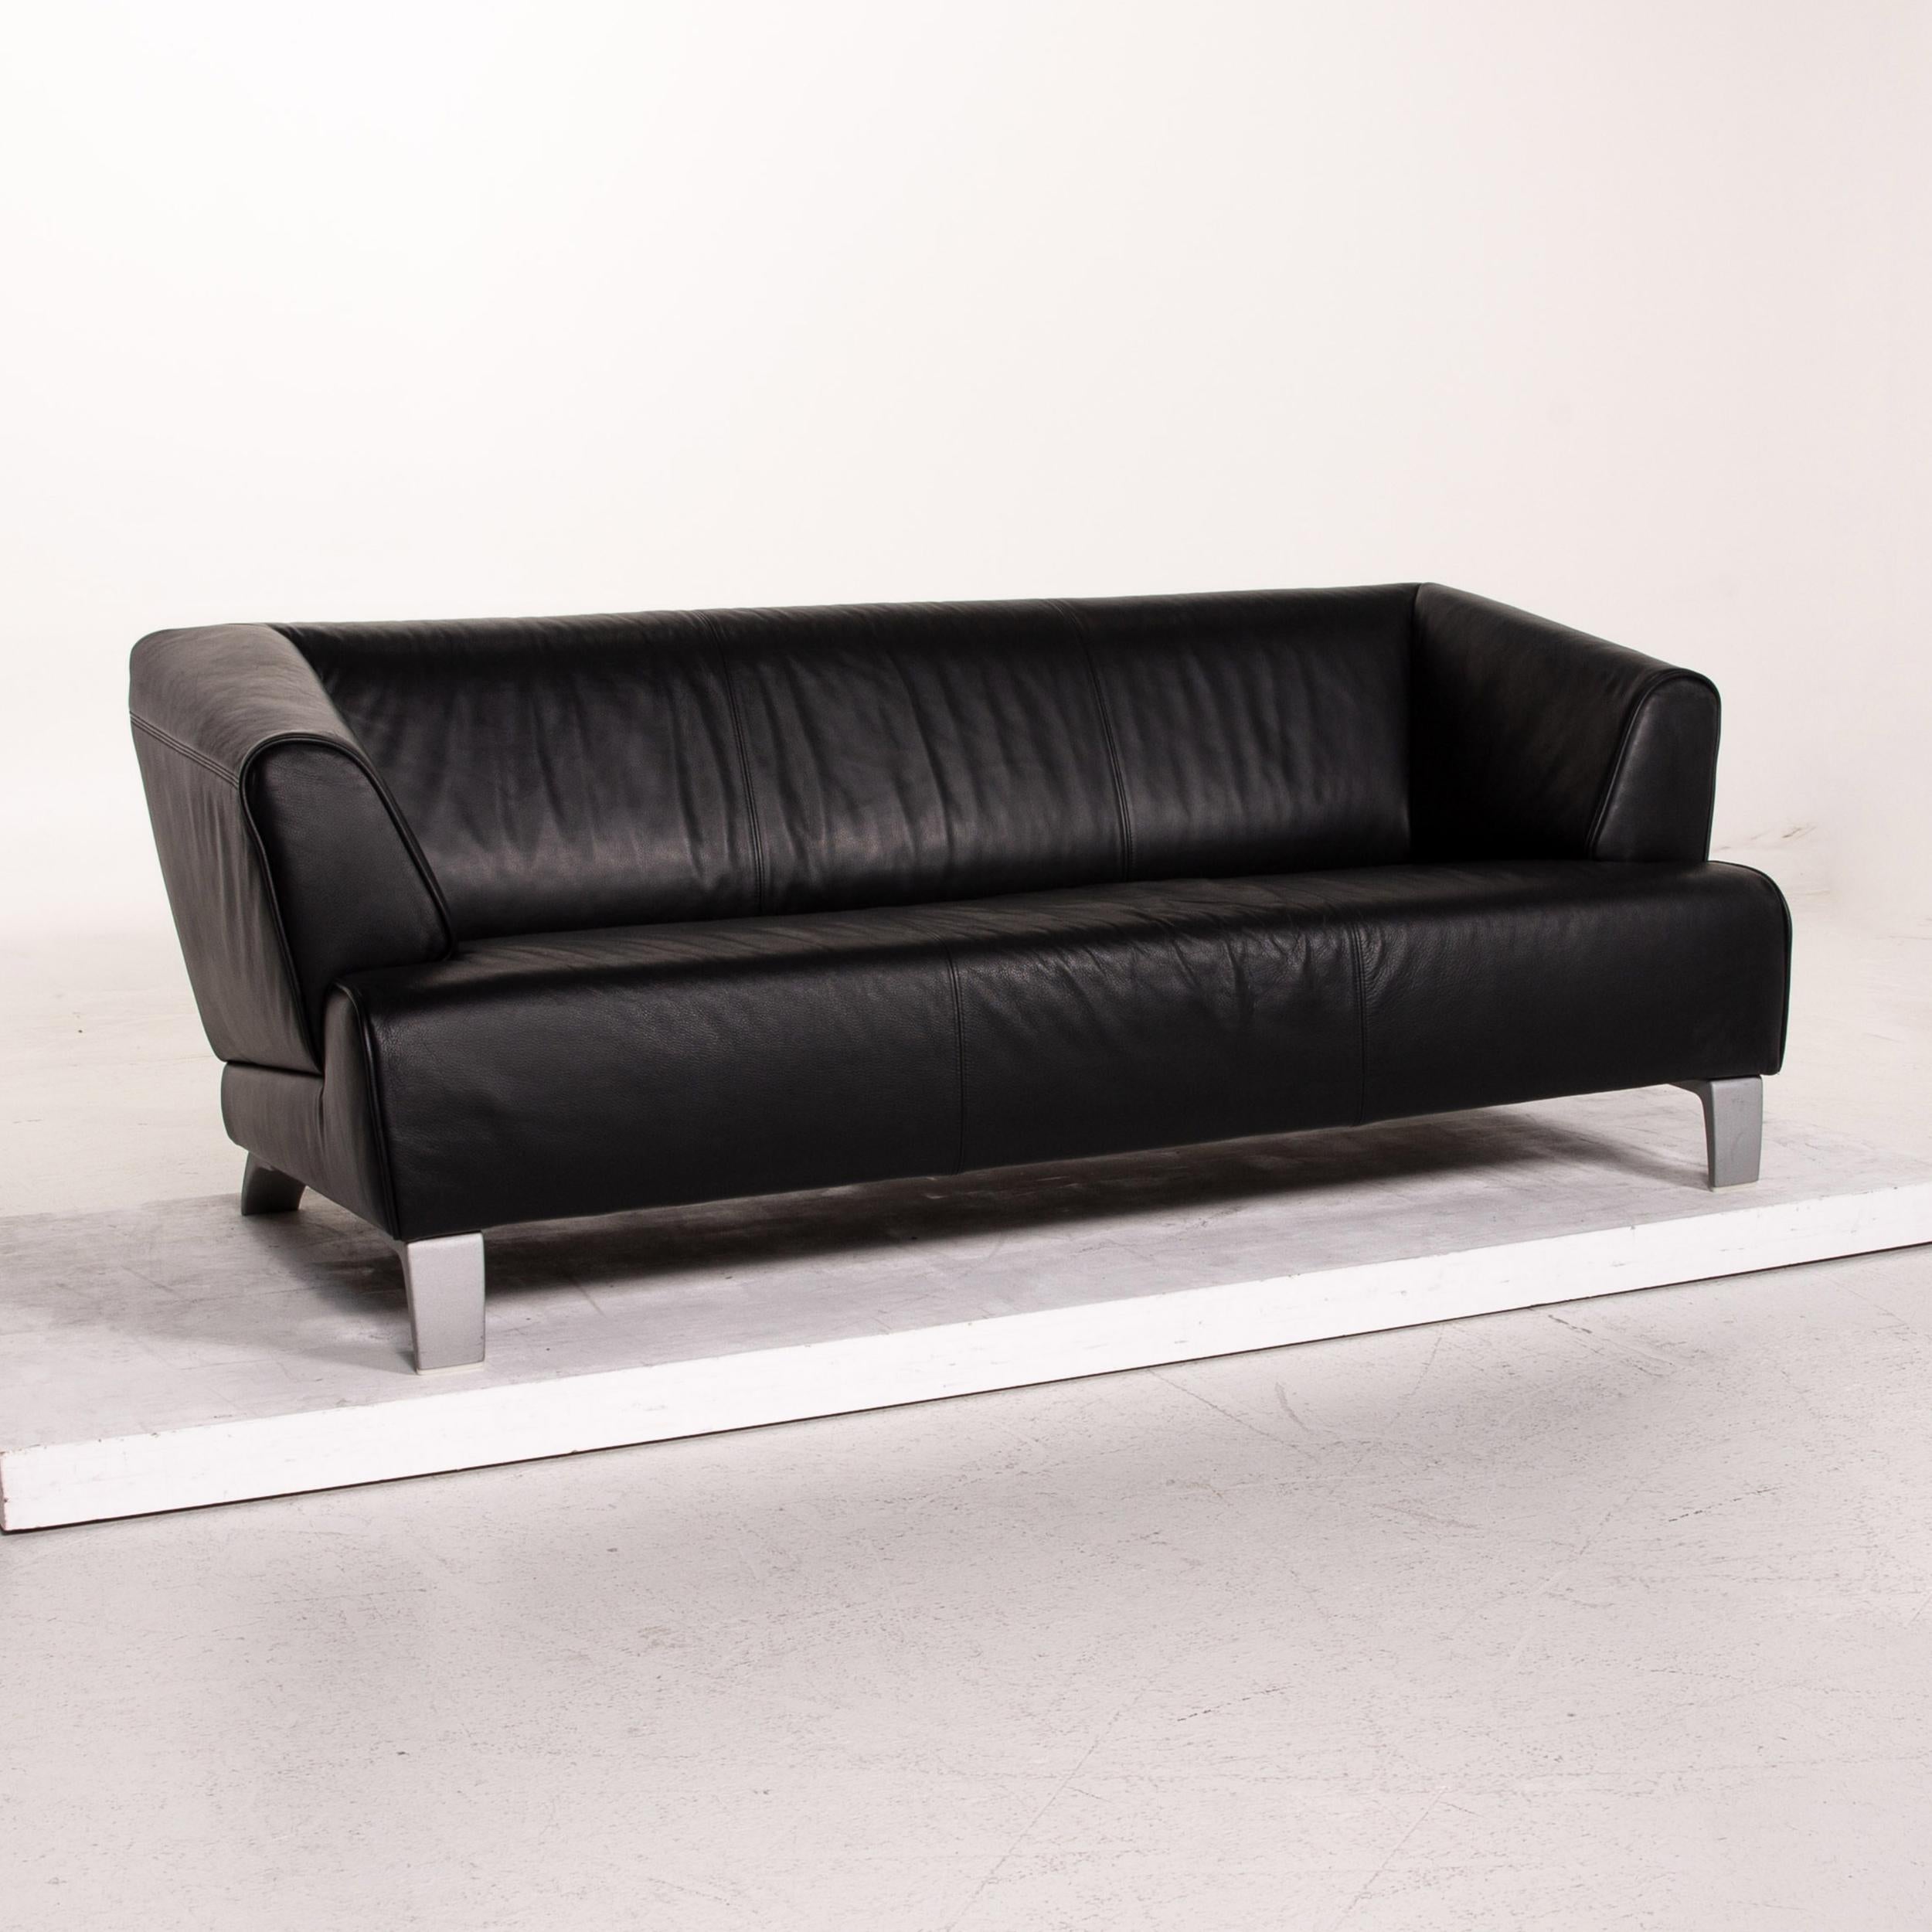 Contemporary Rolf Benz Leather Sofa Black Two-Seat Couch For Sale